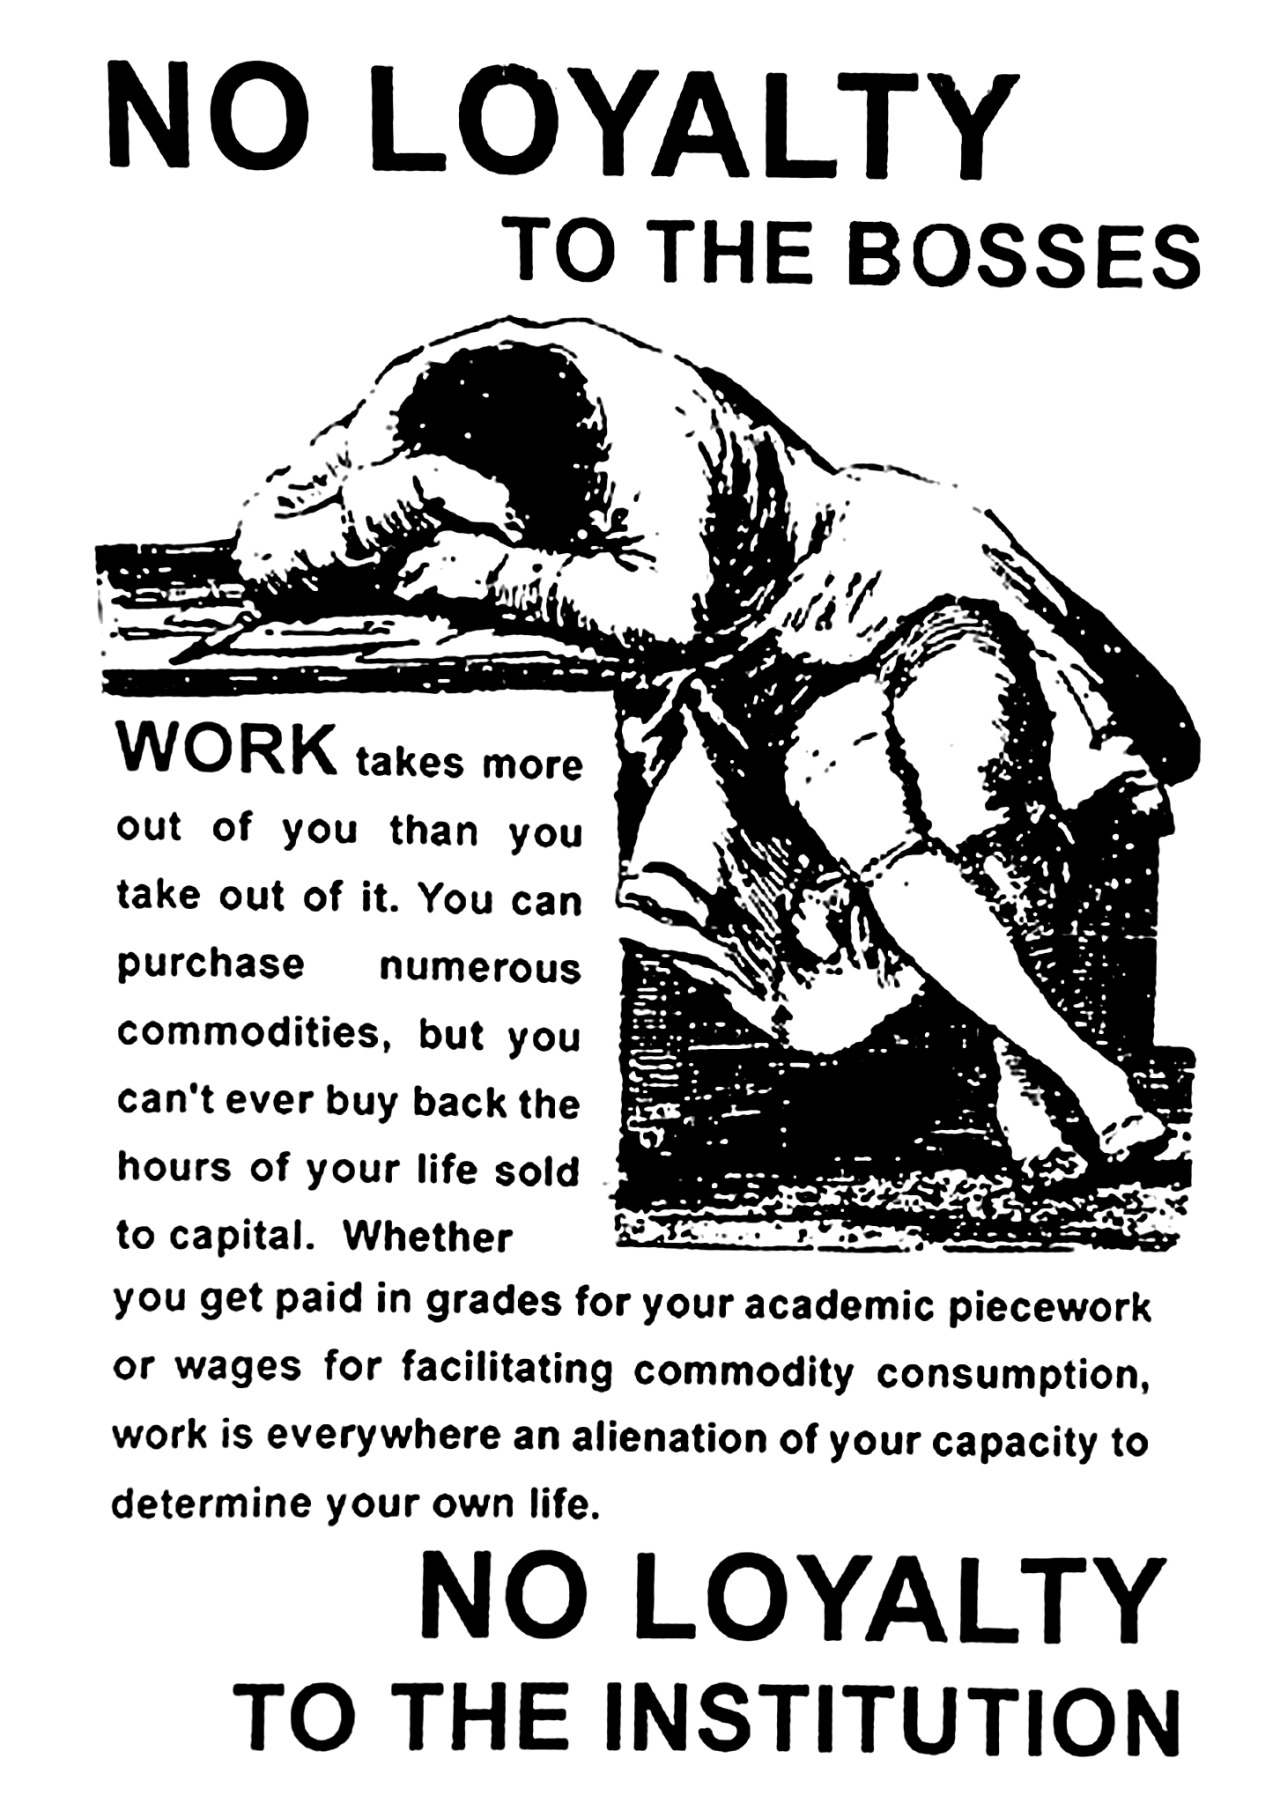 hellyeahanarchistposters:  “No loyalty to the bosses No loyalty to the institution”